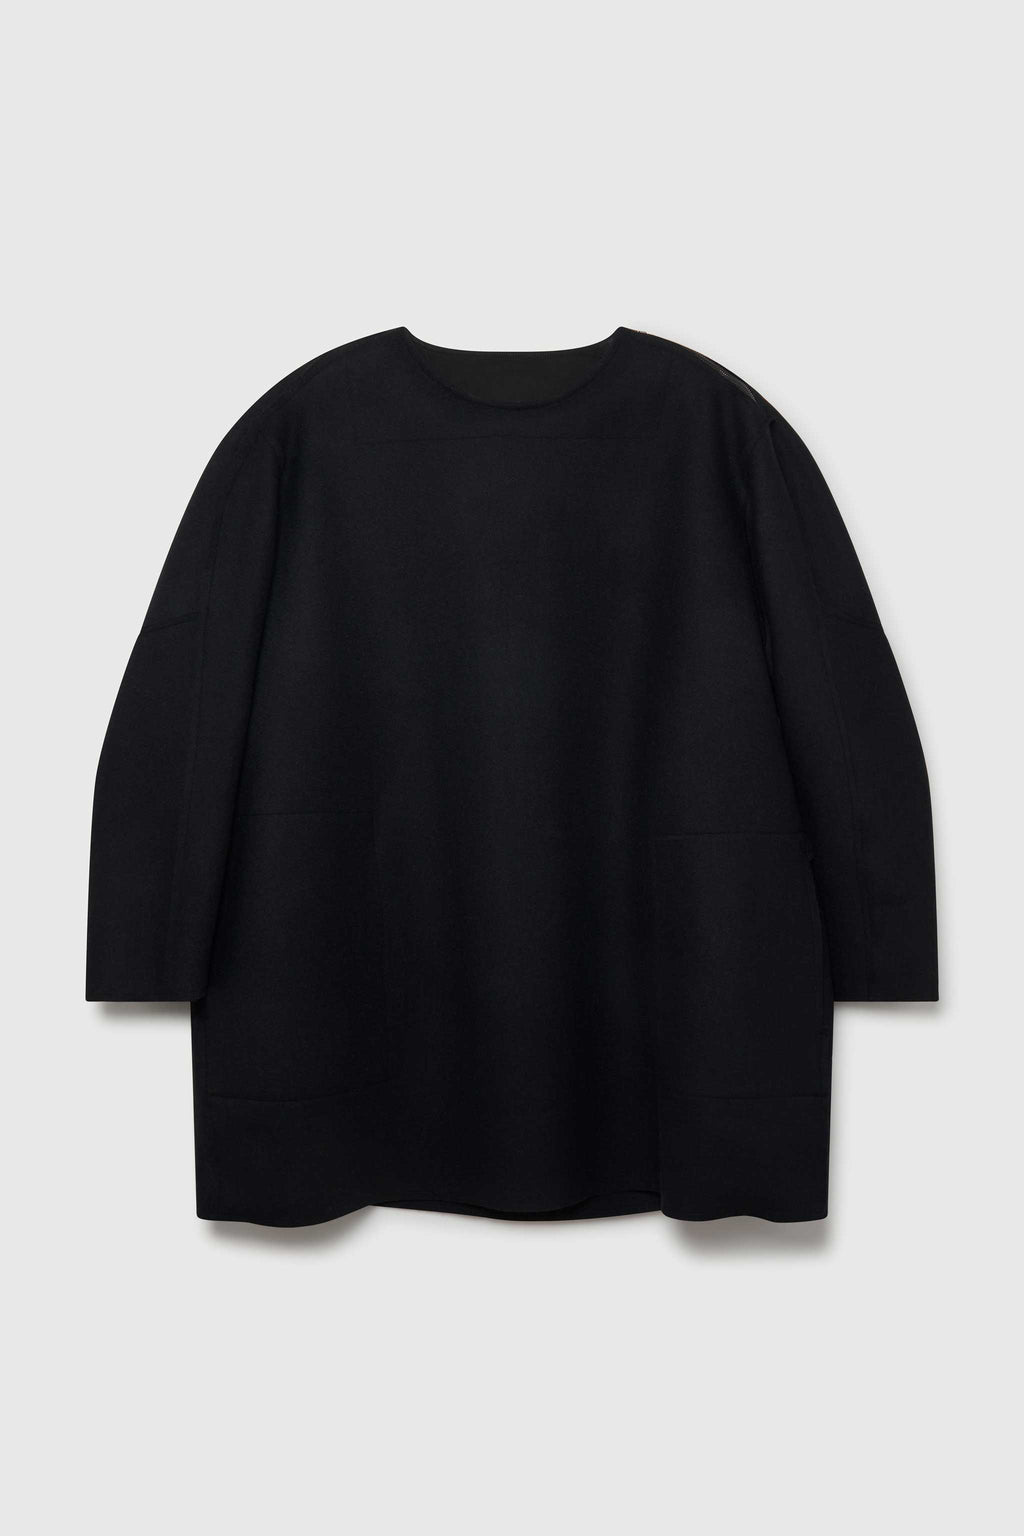 Raw Edge Crew Neck Black Jumper with 3/4 Length Sleeves 100% Wool